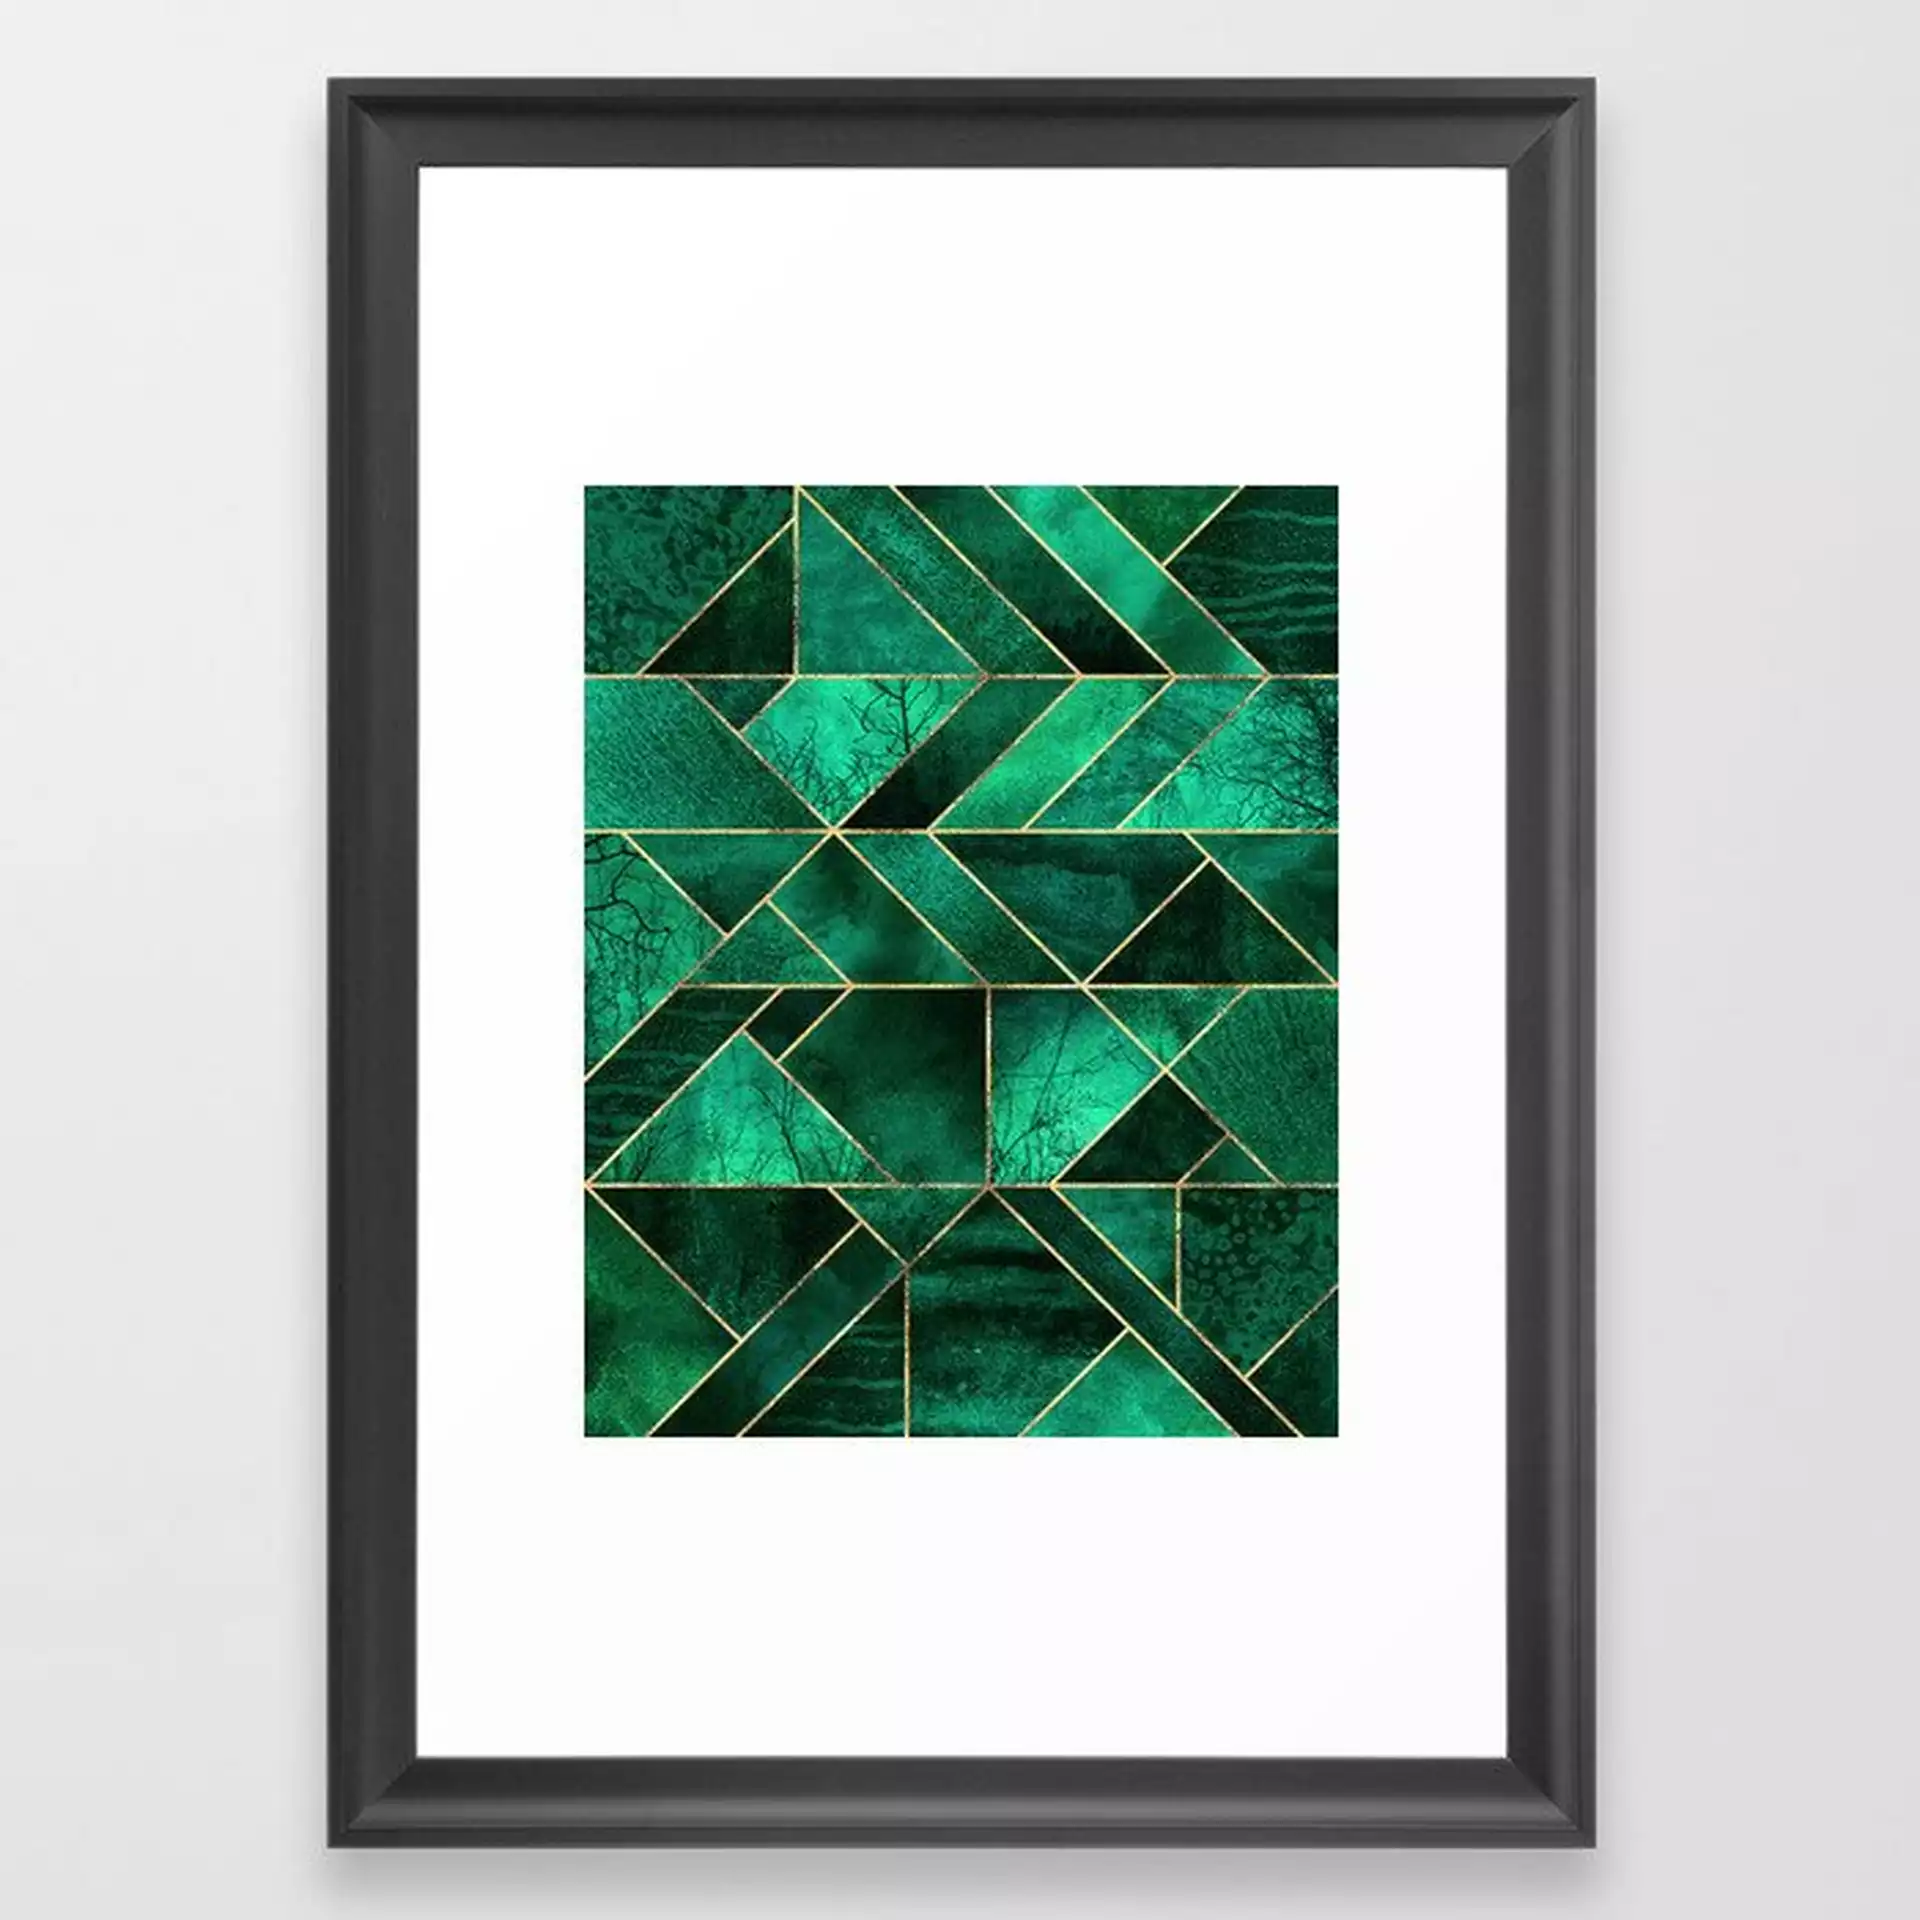 Abstract Nature - Emerald Green Framed Art Print by Elisabeth Fredriksson - Scoop Black - SMALL-15x21